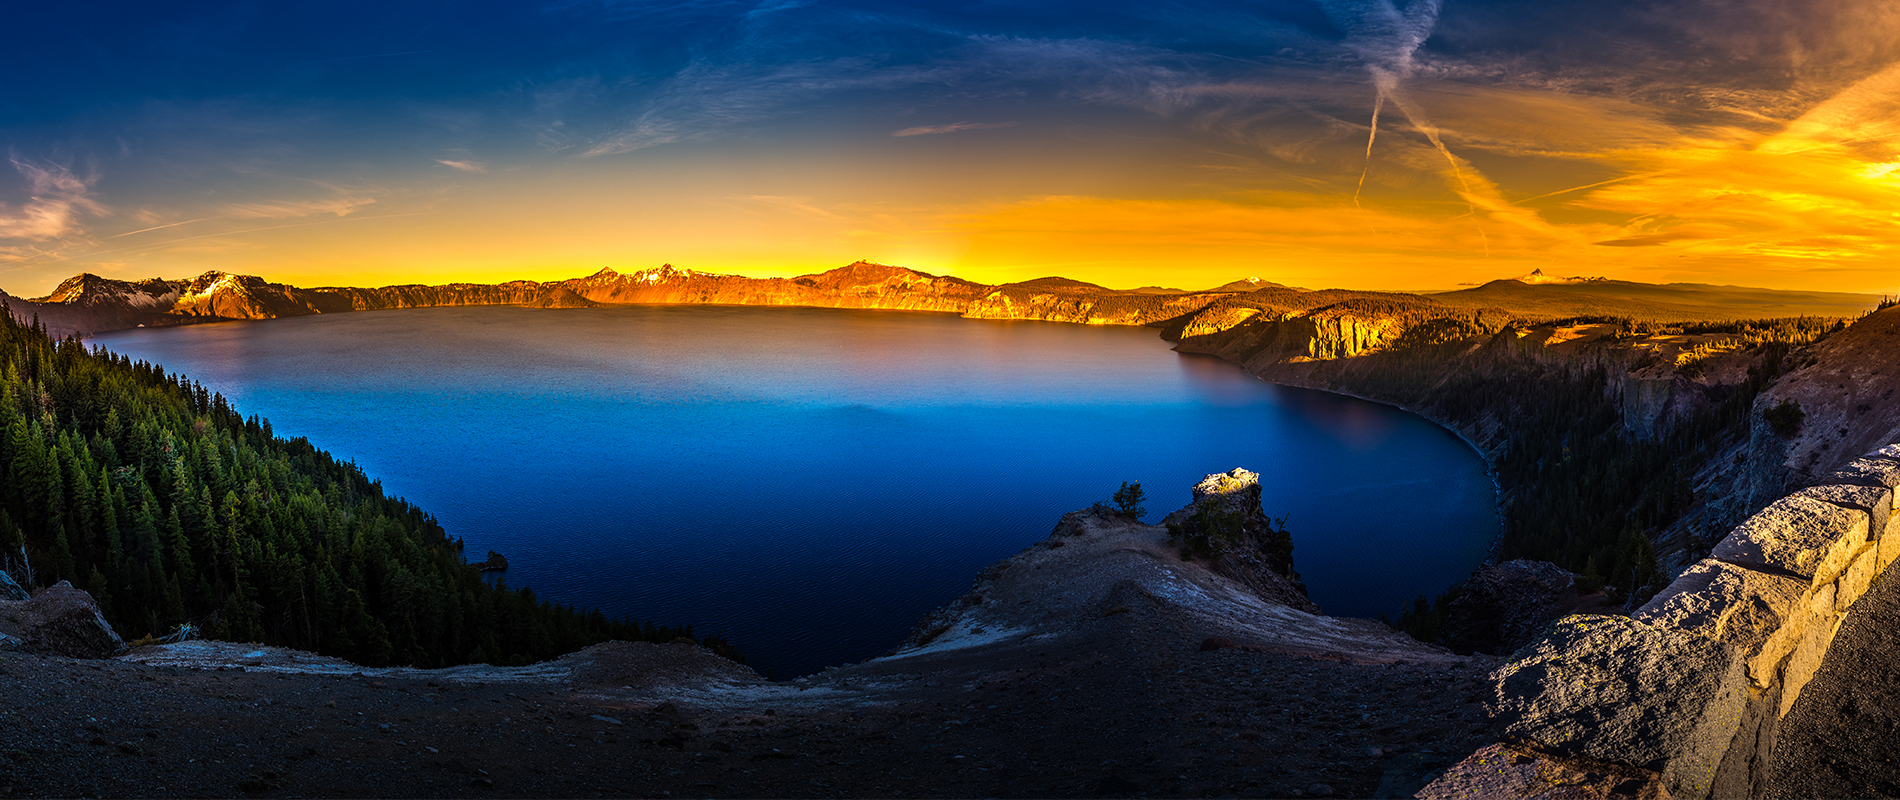 Crater Lake, The Lightest Lake in the World